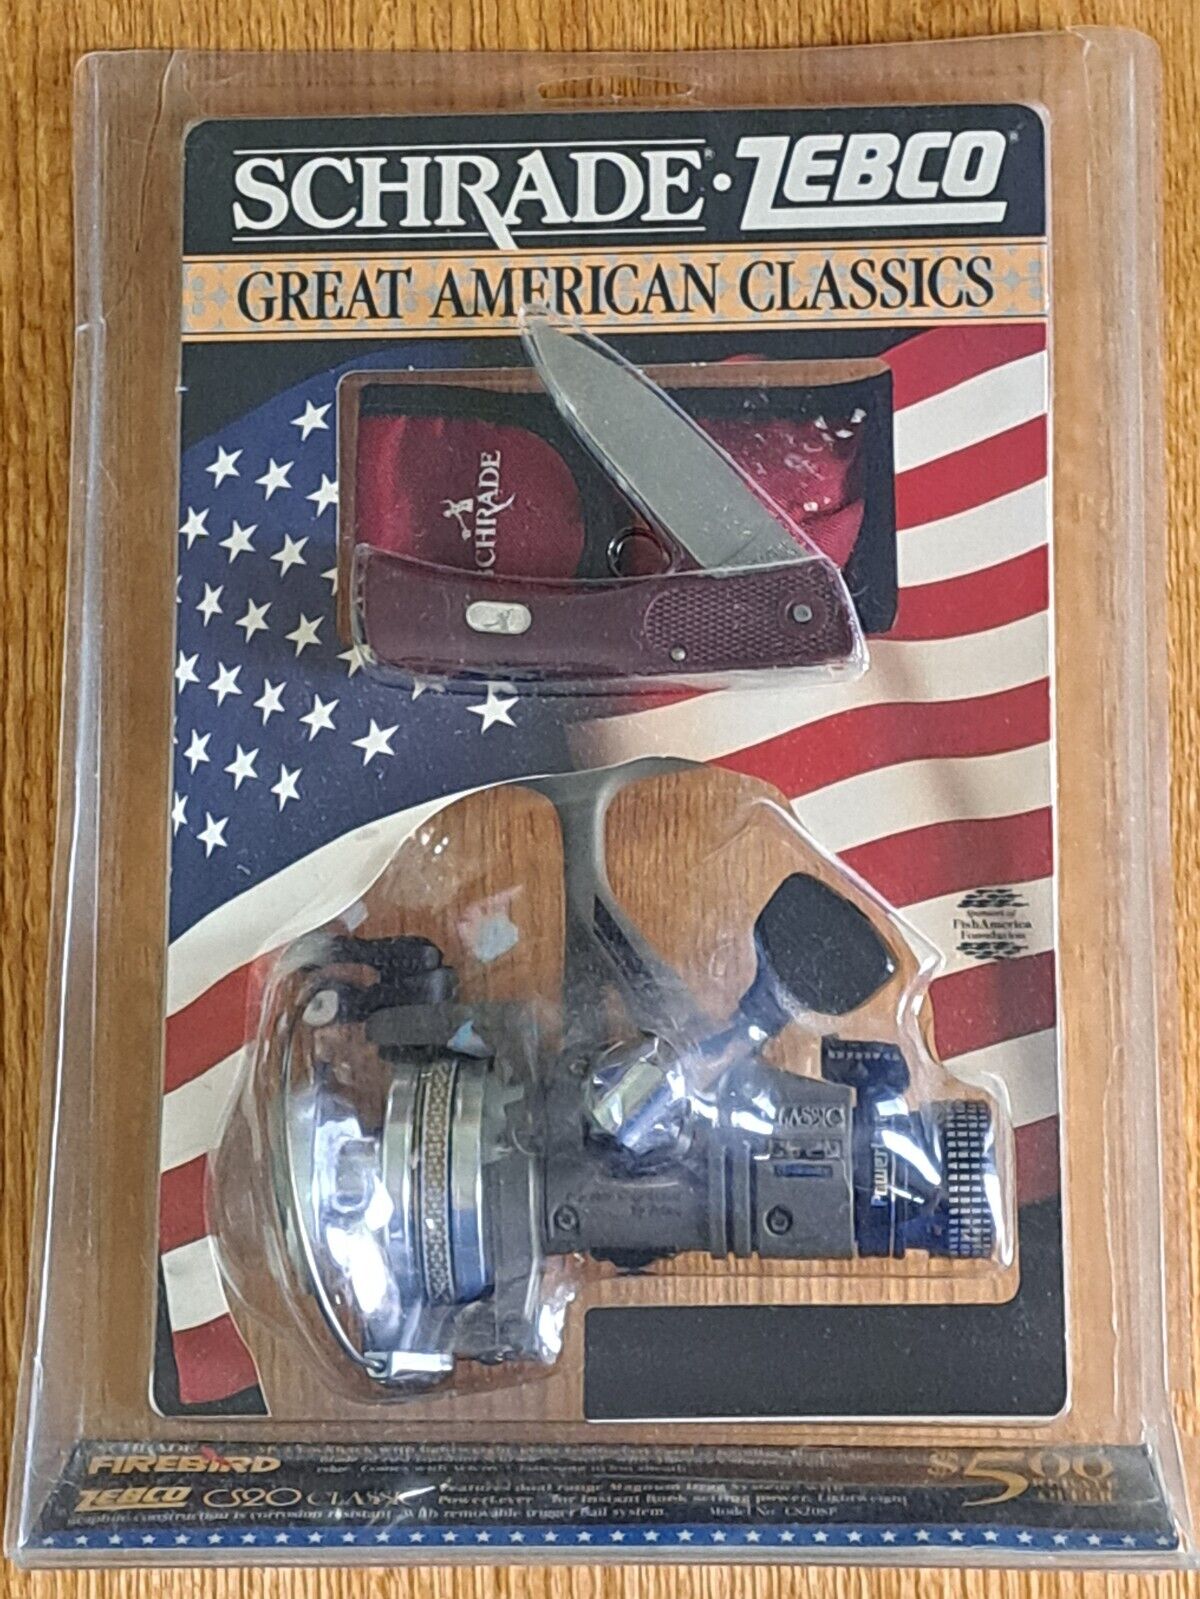 Schrade USA /Zebco Great American Classics Combo Pack